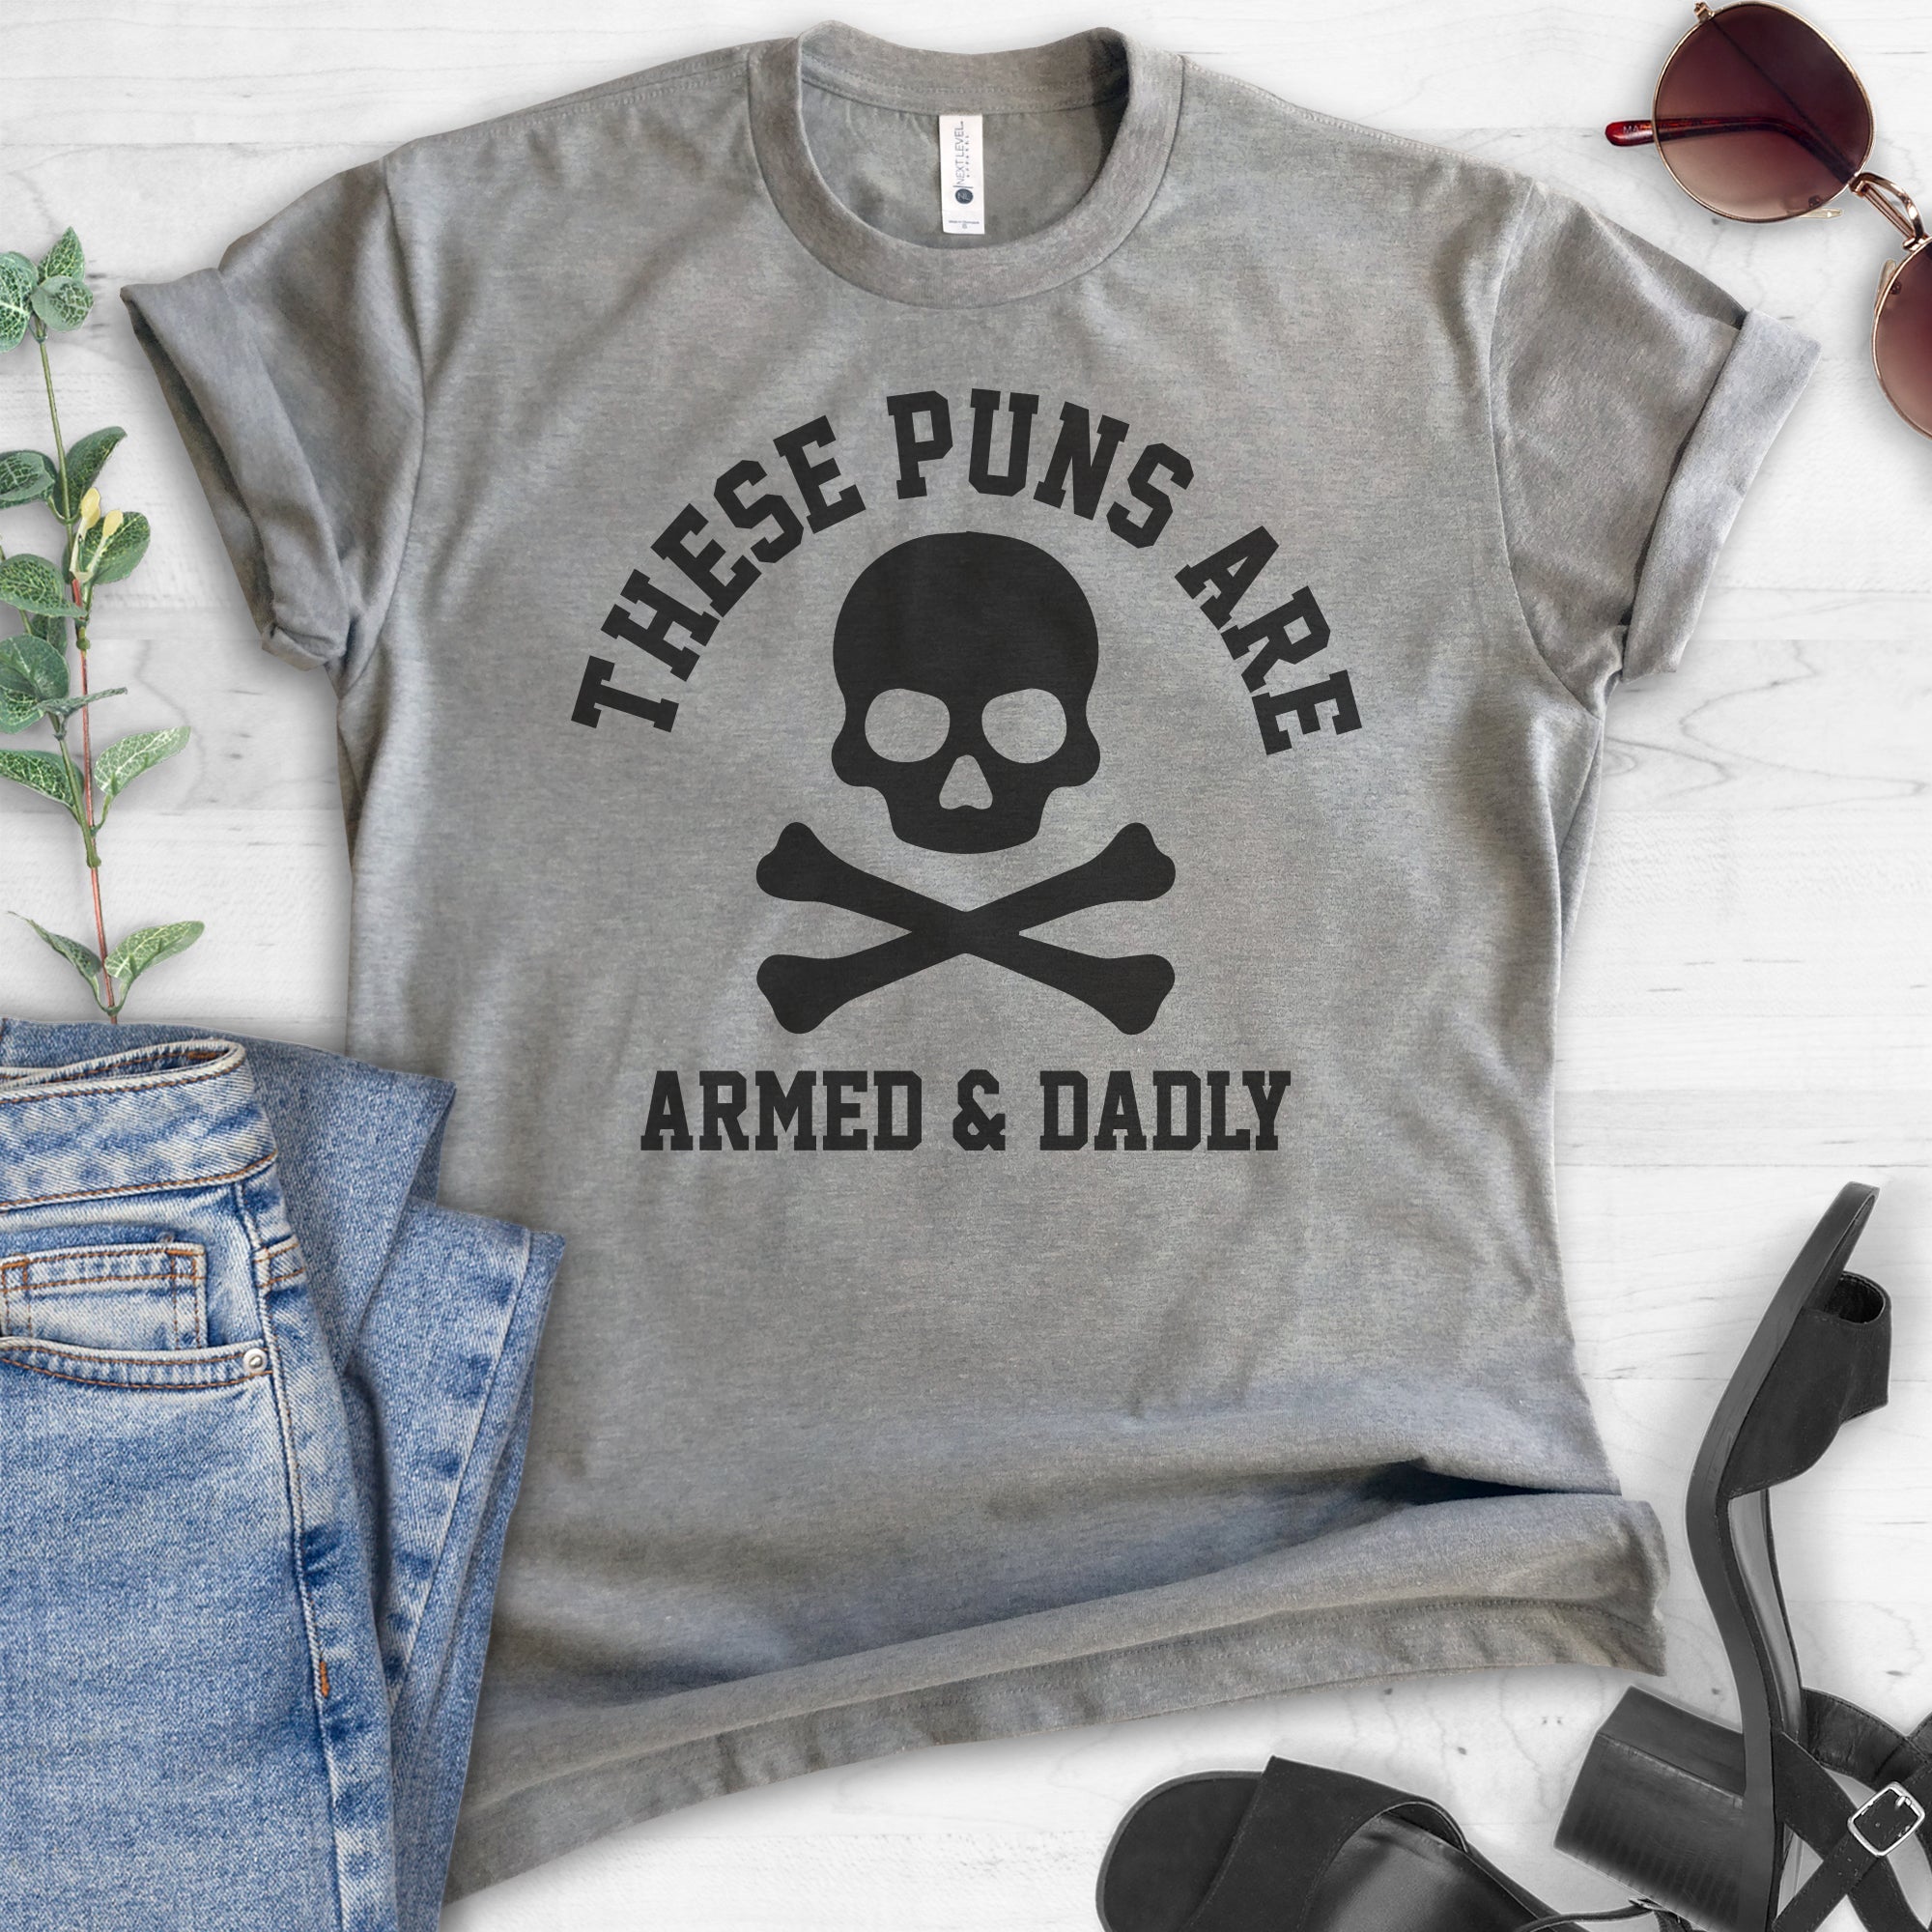 These Puns Are Armed & Dadly T-shirt